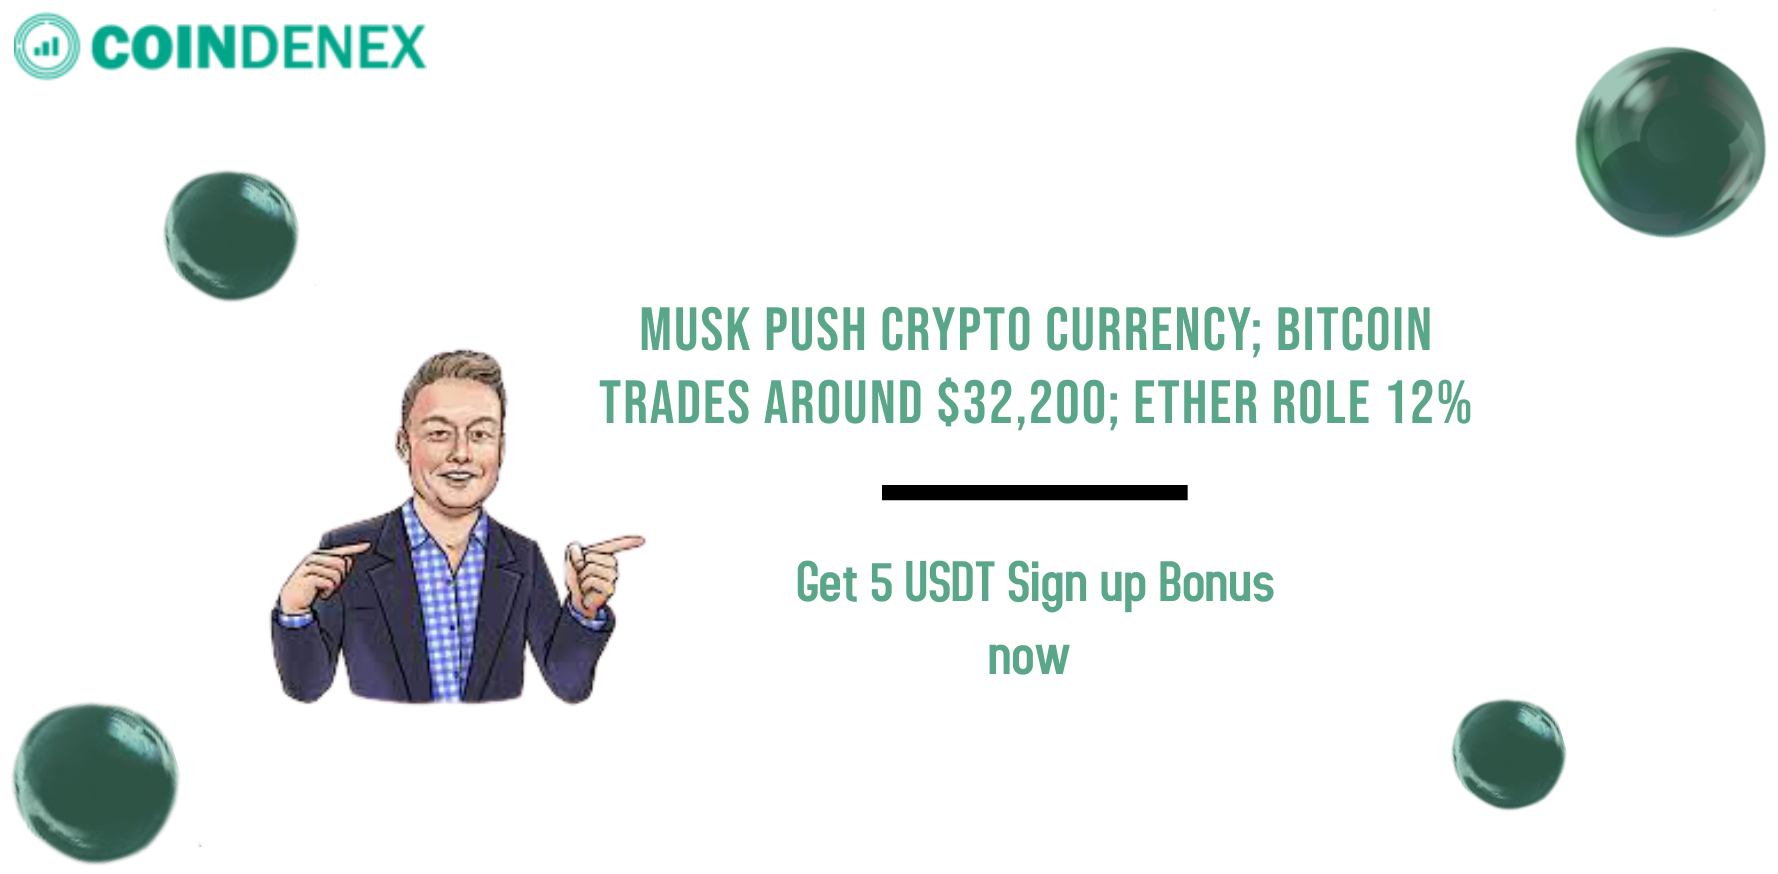 Musk cryptocurrency Coin News